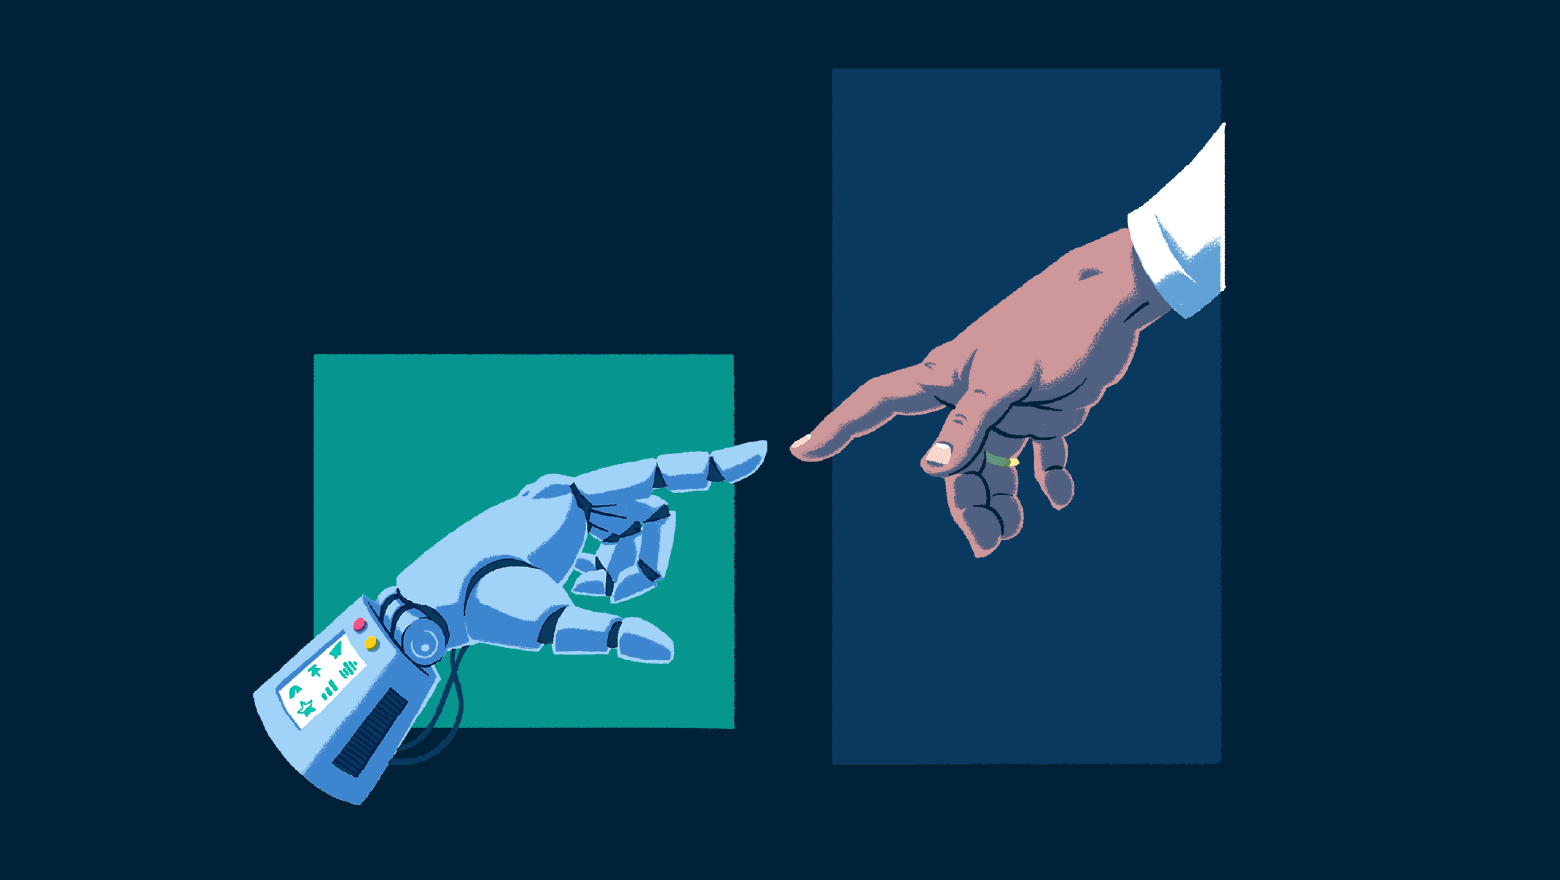 Robot hand and man's hand reaching for each other